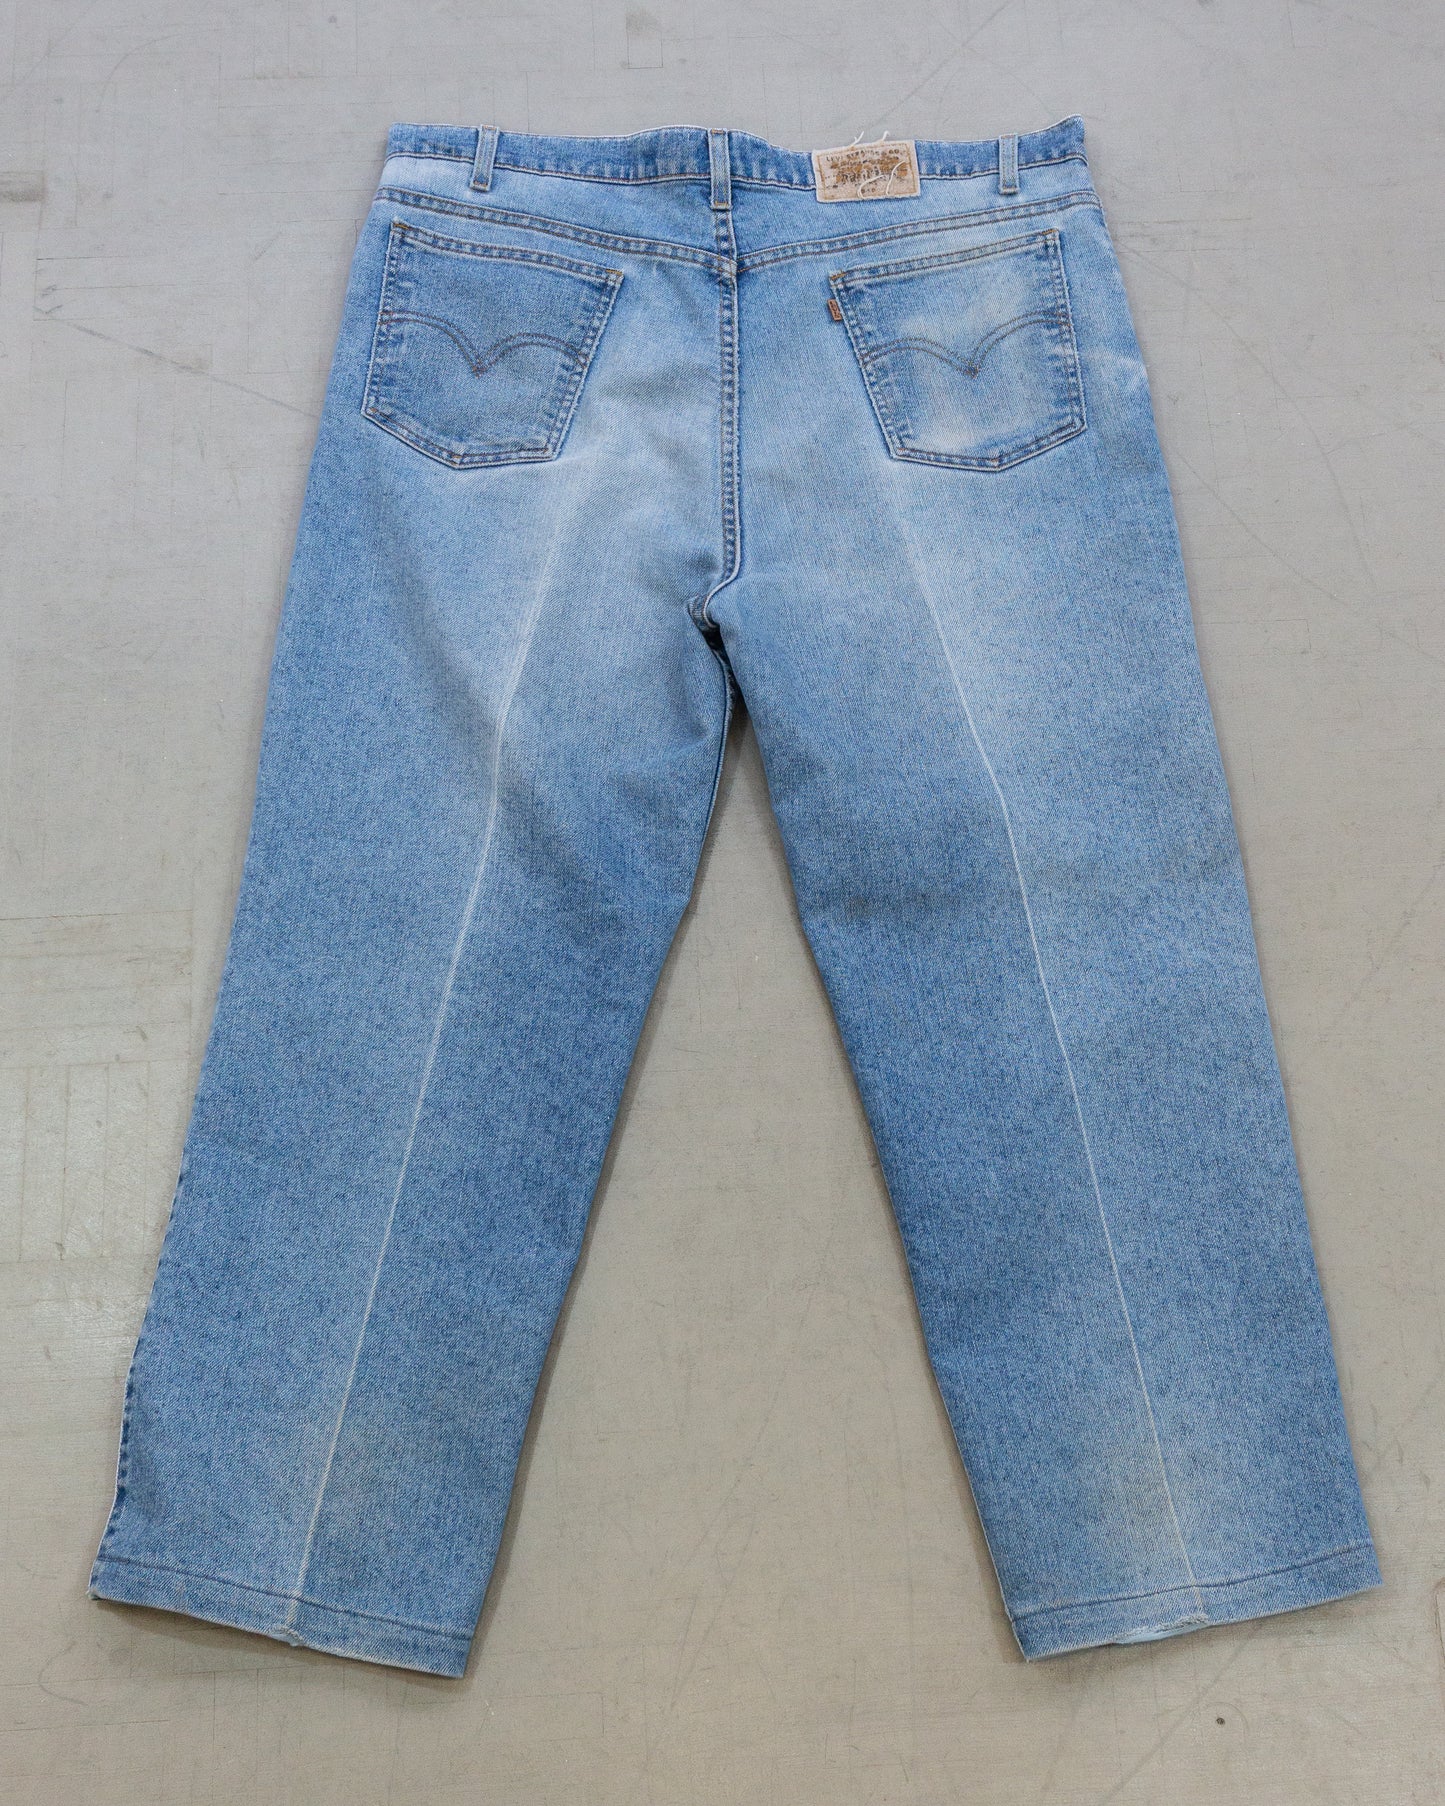 90s Levi's Signtature 540 Relaxed Fit Jeans (40x27)